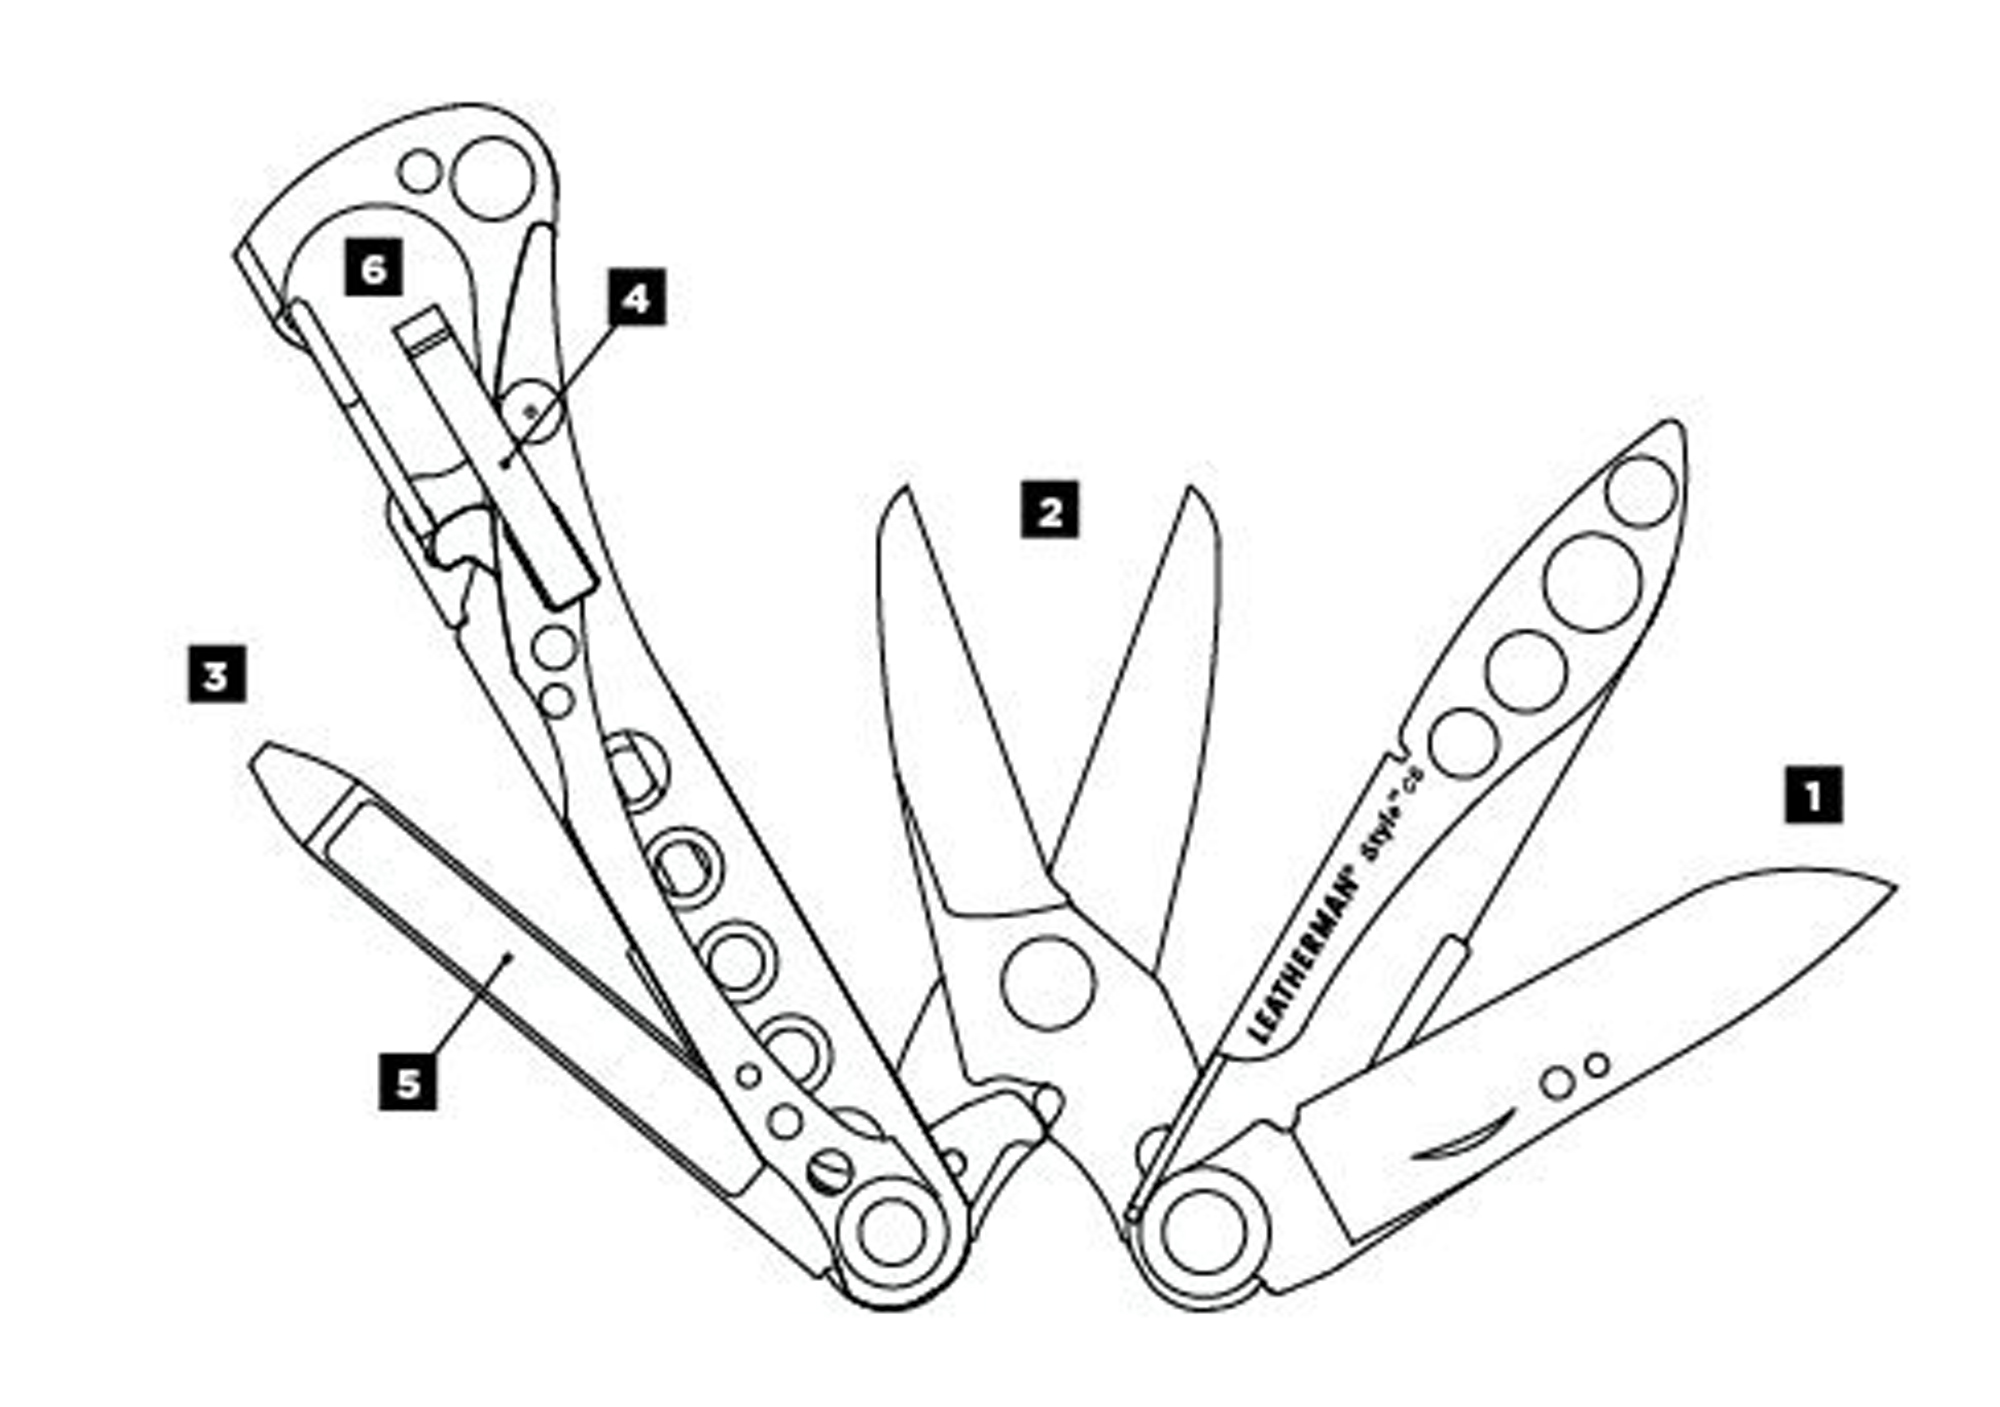 Leatherman, Style CS Keychain Multitool with Spring-Action Scissors and Grooming Tools, Stainless Steel - image 2 of 7